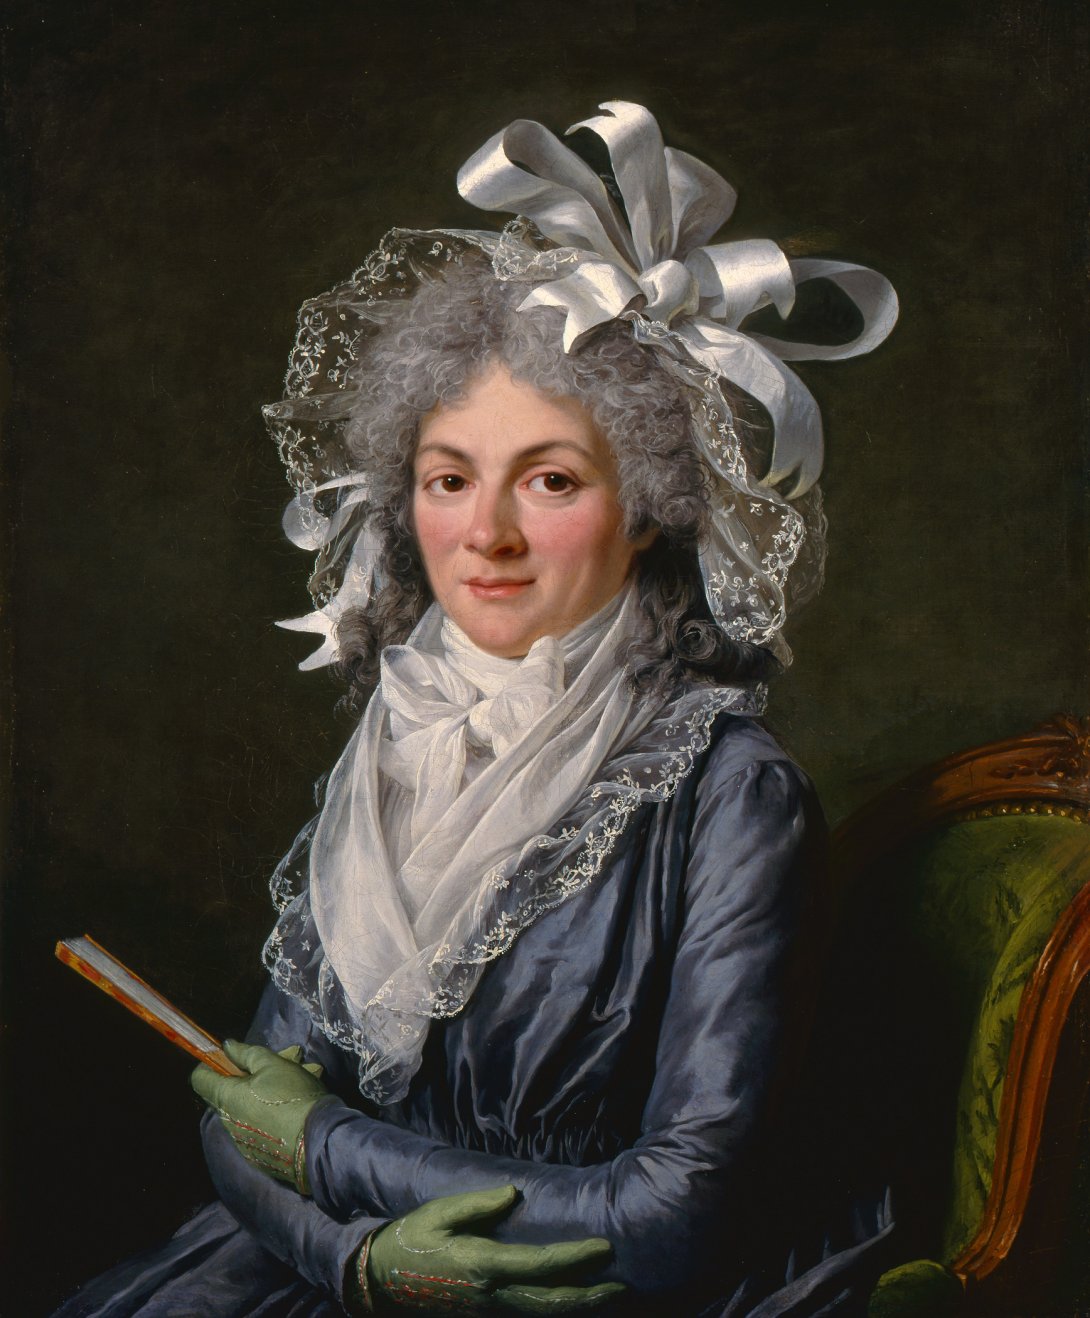 Portrait of Madame de Genlis wearing a blue dress and green gloves, looking directly at the viewer